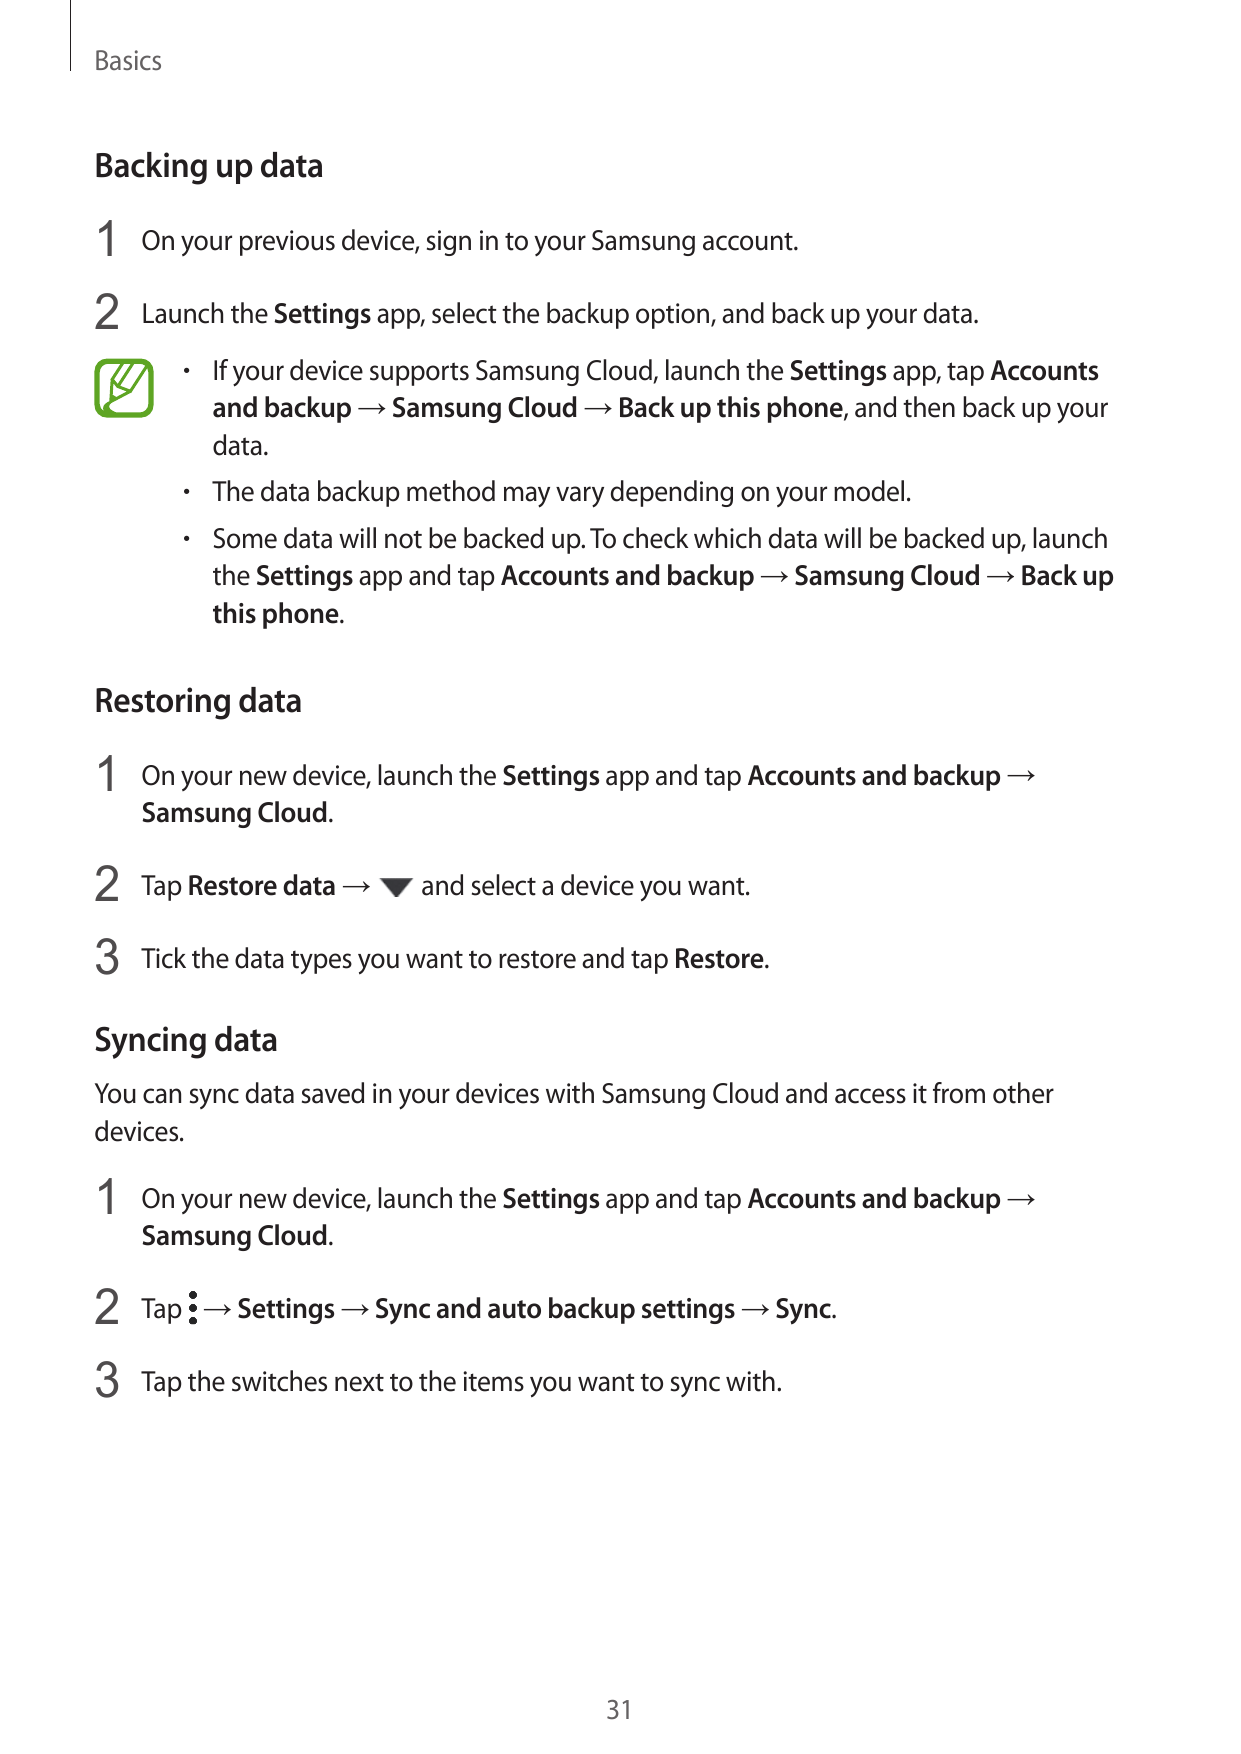 BasicsBacking up data1 On your previous device, sign in to your Samsung account.2 Launch the Settings app, select the backup opt